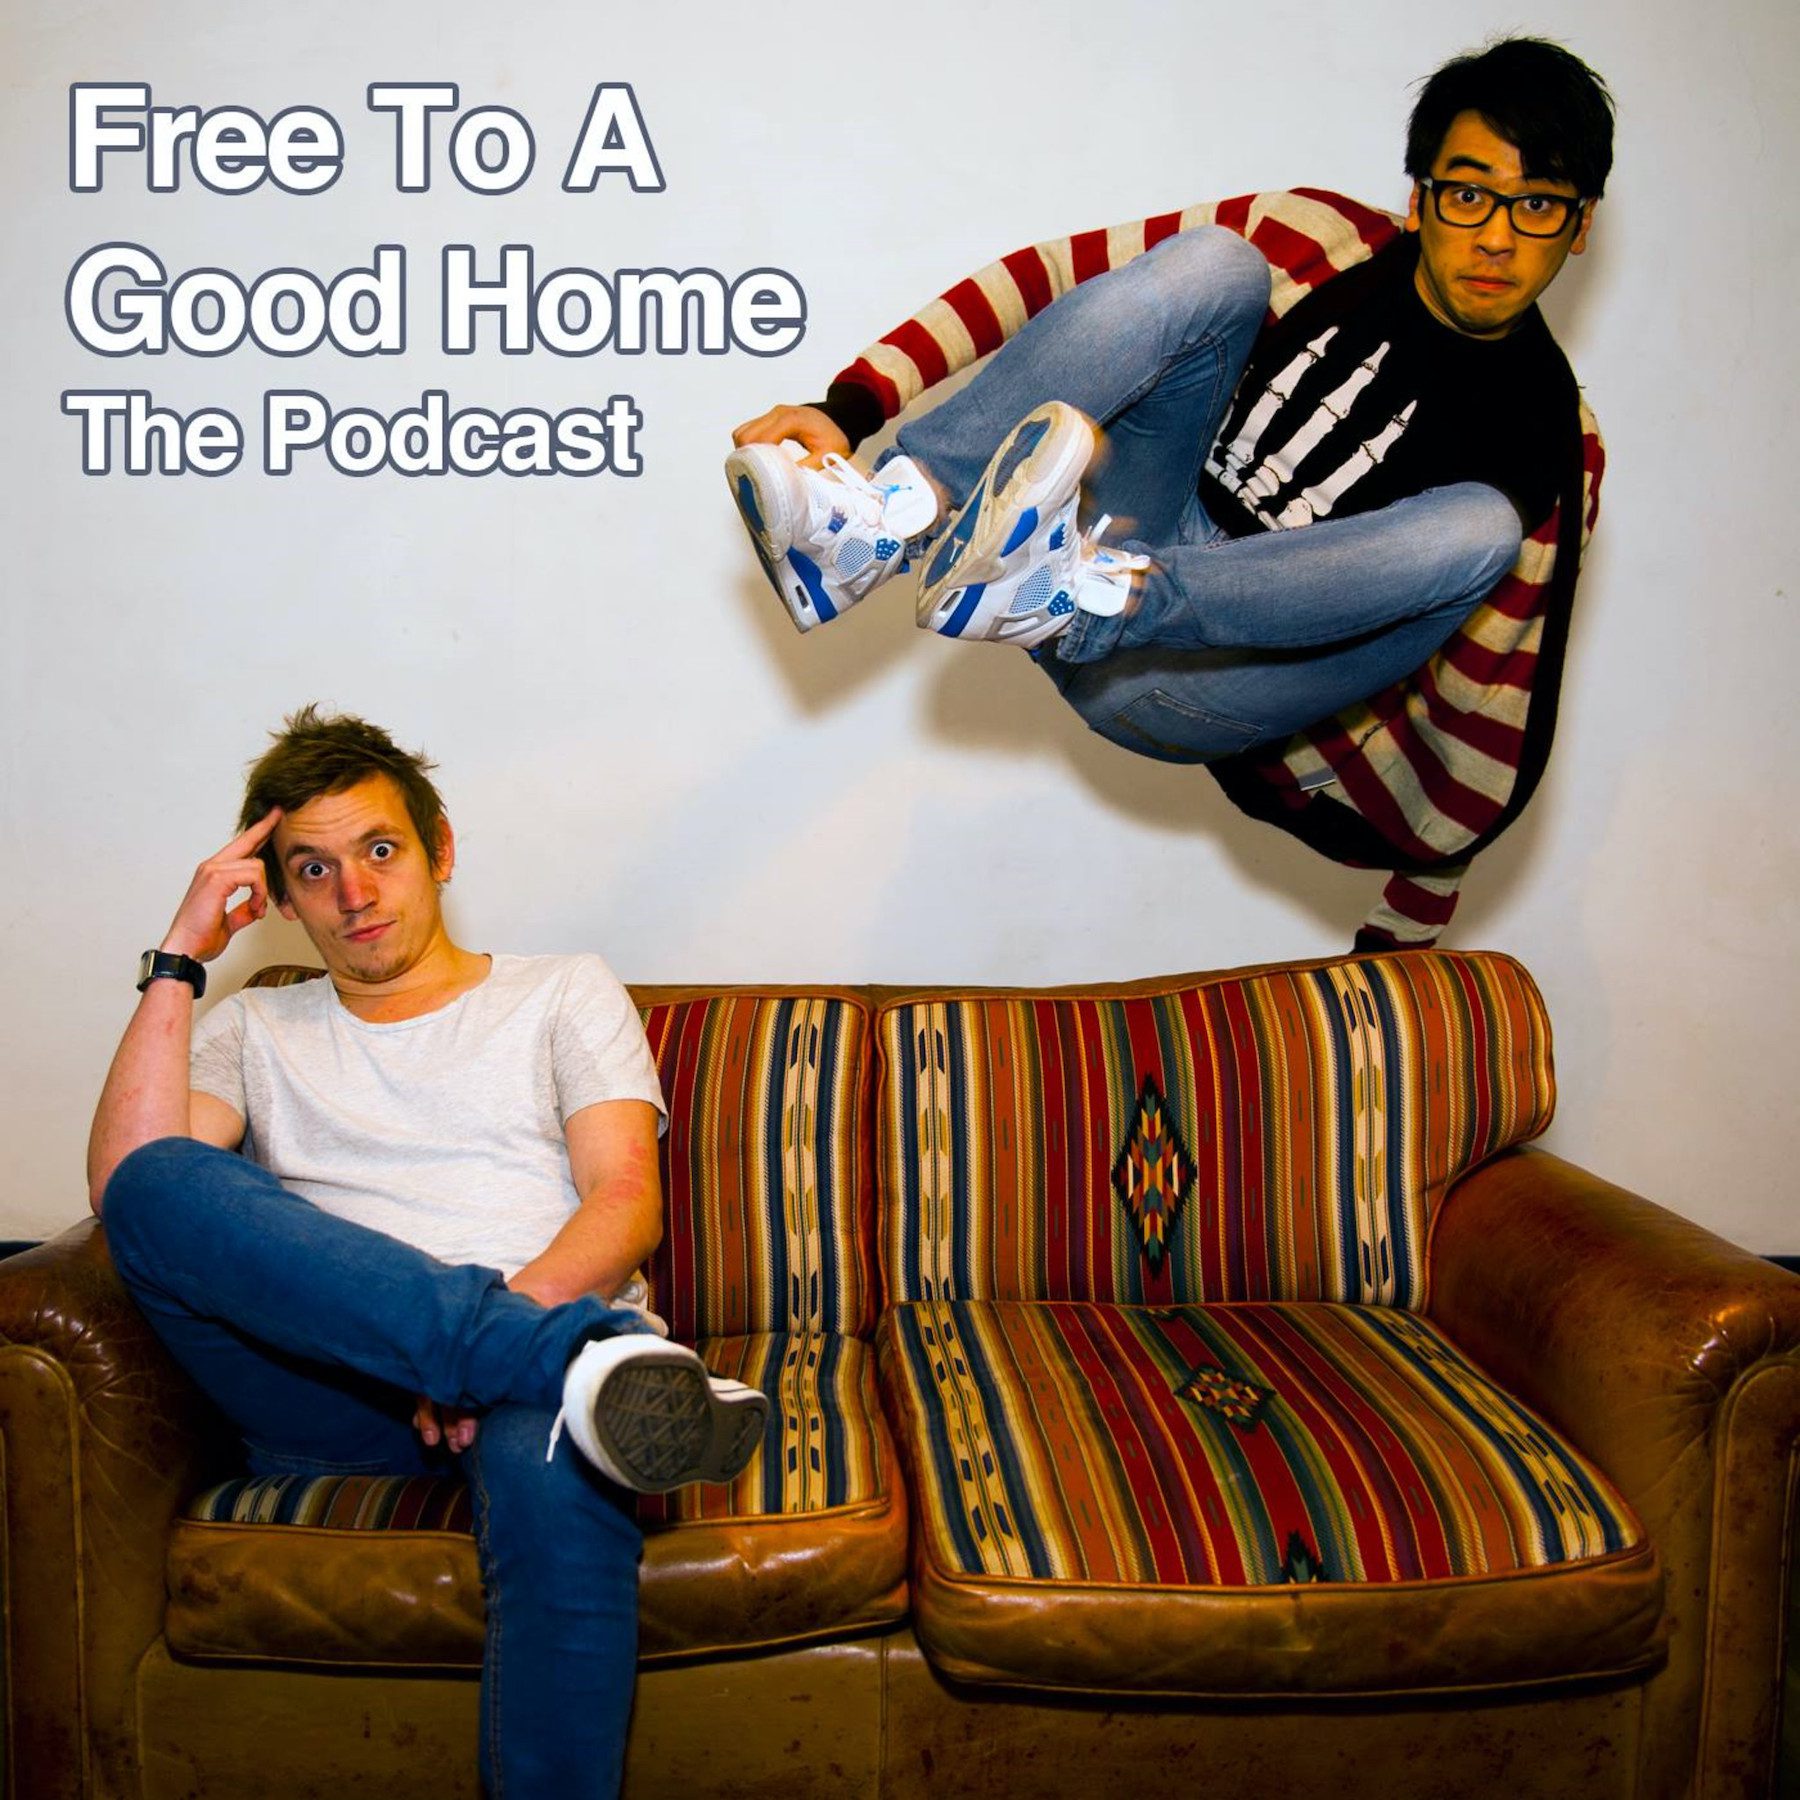 Free to a Good Home The Podcast cover art with one host sitting on sofa, the other cannonballing into his seat.